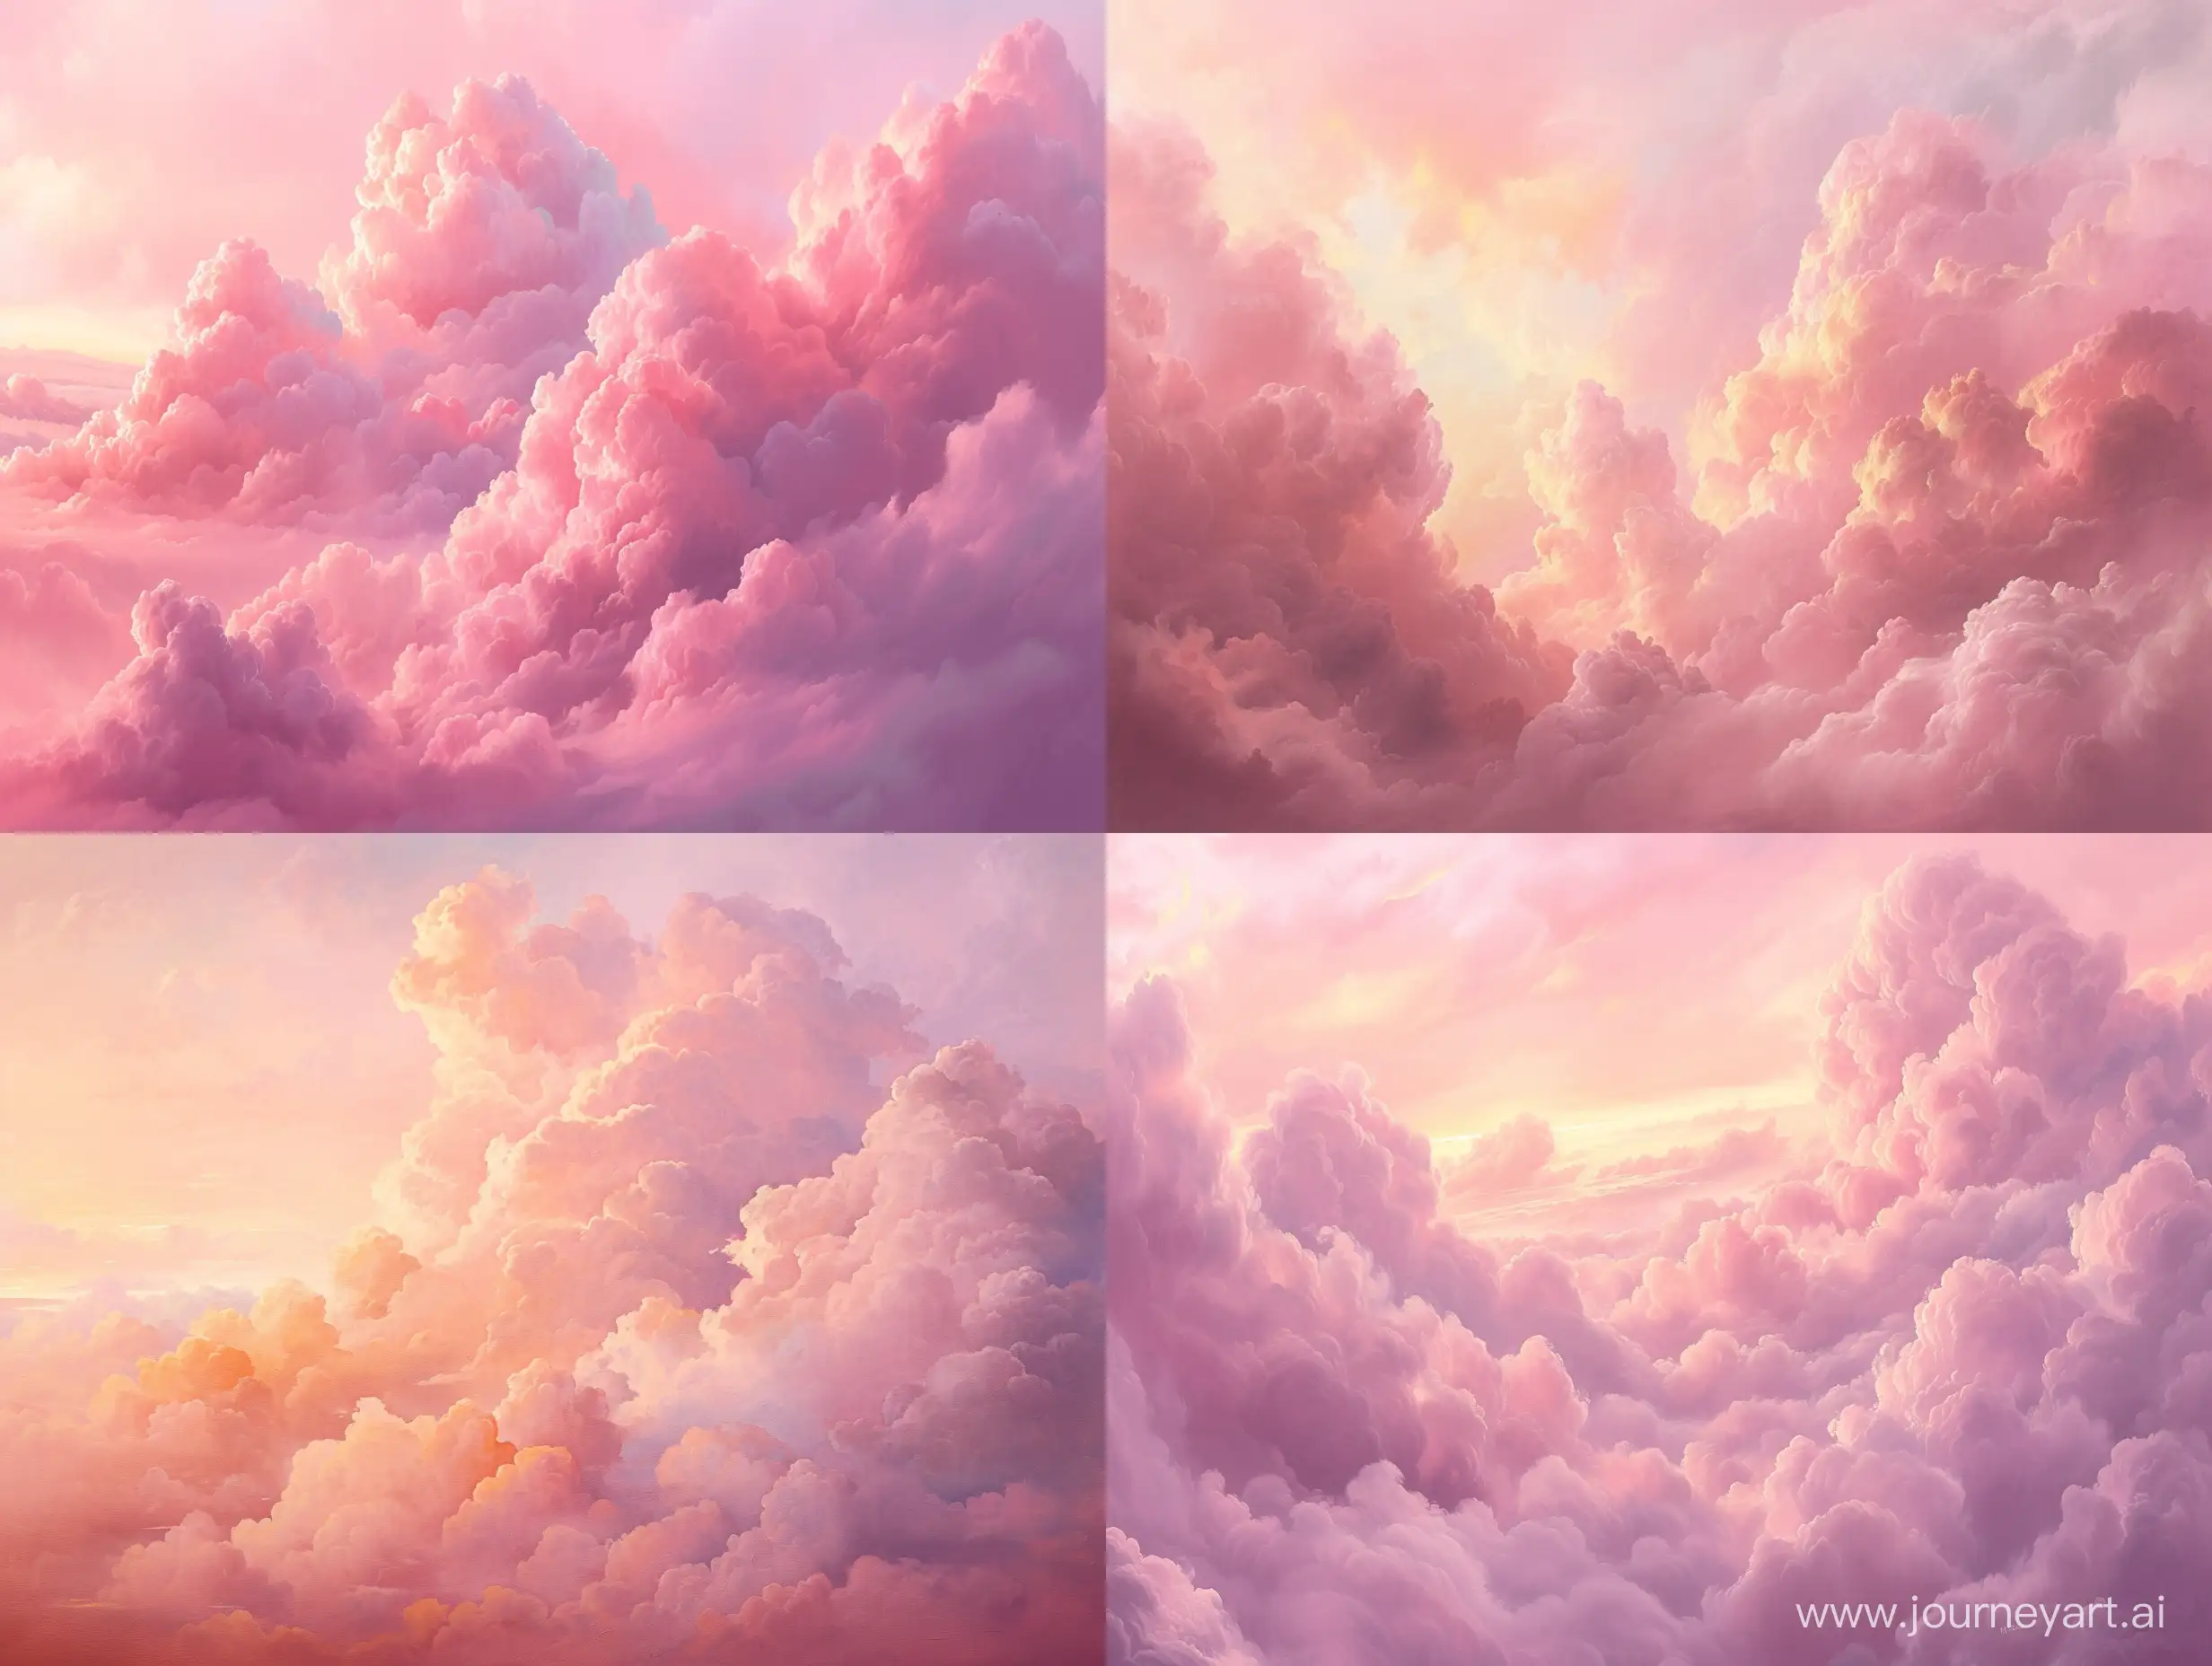 Ethereal-Sunset-Sky-in-Soft-Pink-Tones-Dreamy-Oil-Painting-with-Fluffy-Clouds-and-Cotton-Candy-Texture